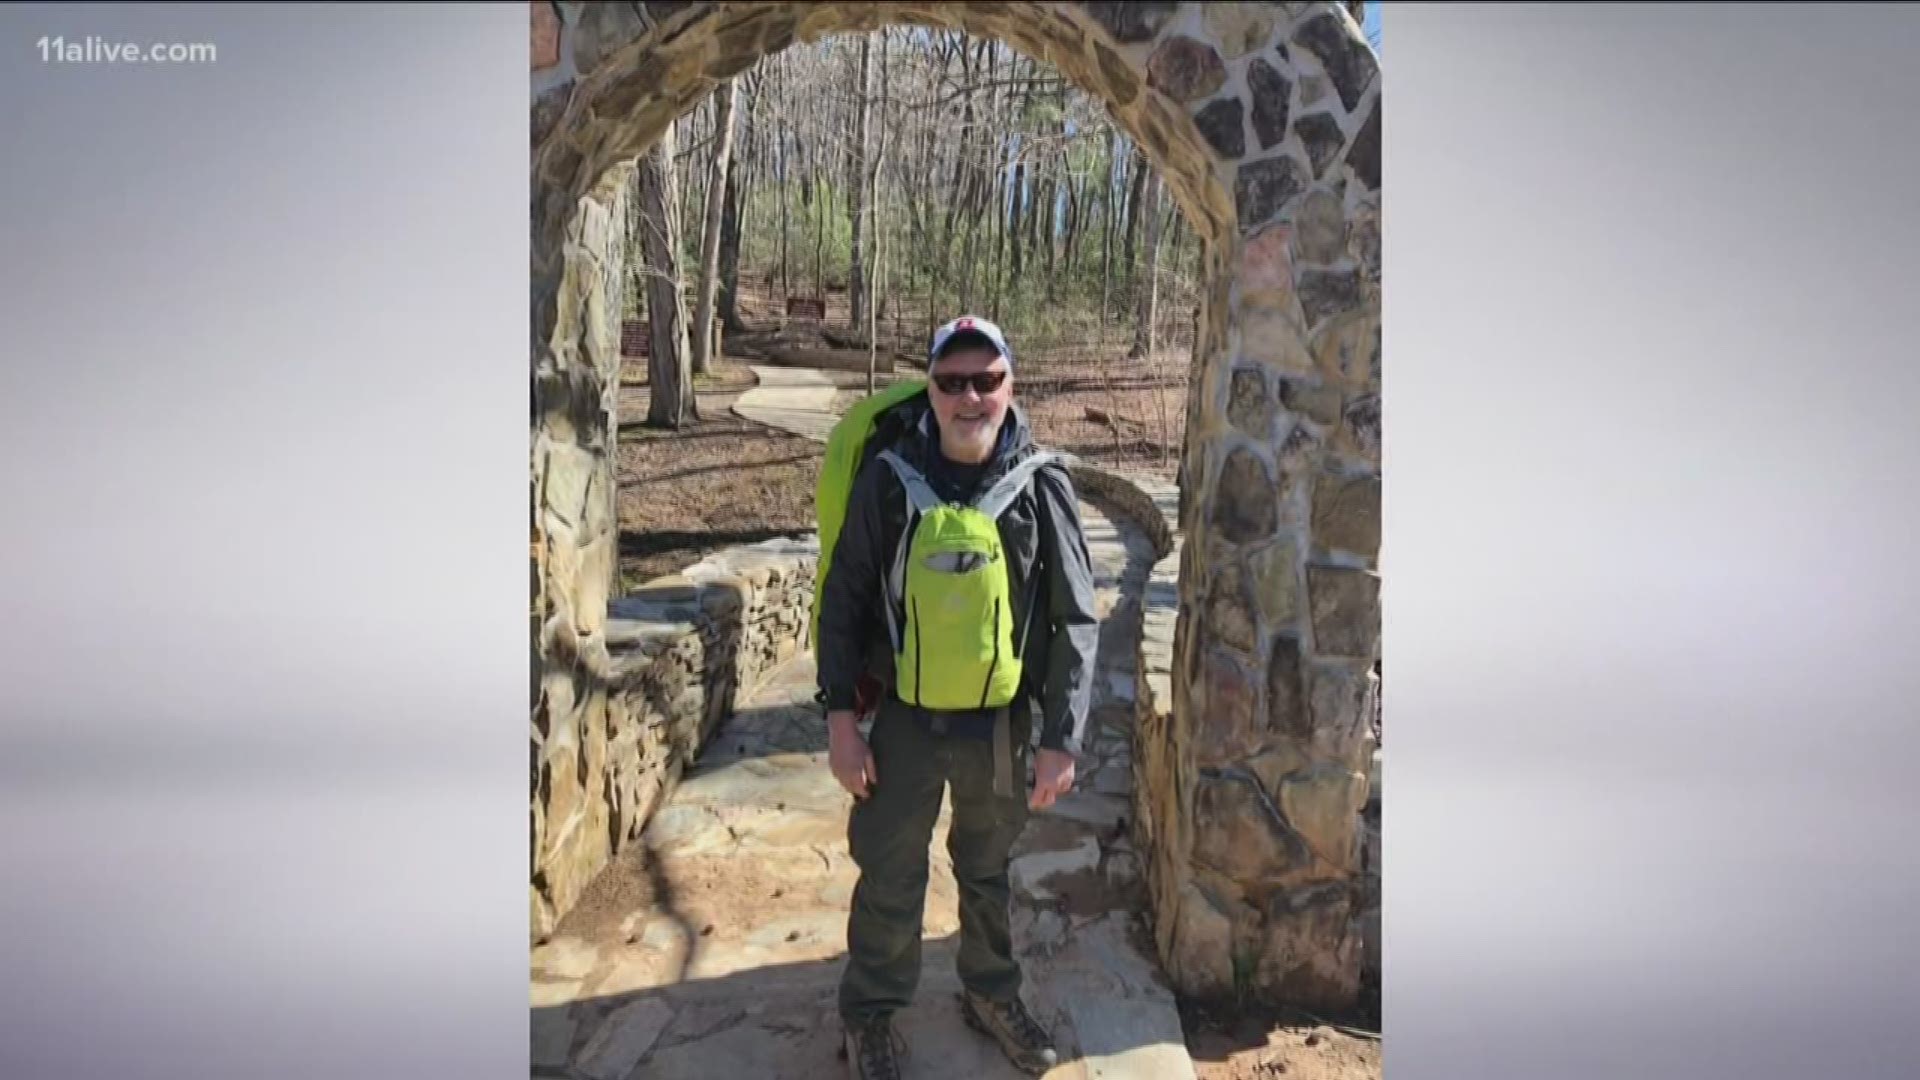 Days after a hiker went missing along a trail in the north Georgia mountains, authorities are mounting a massive search to help bring him back home.